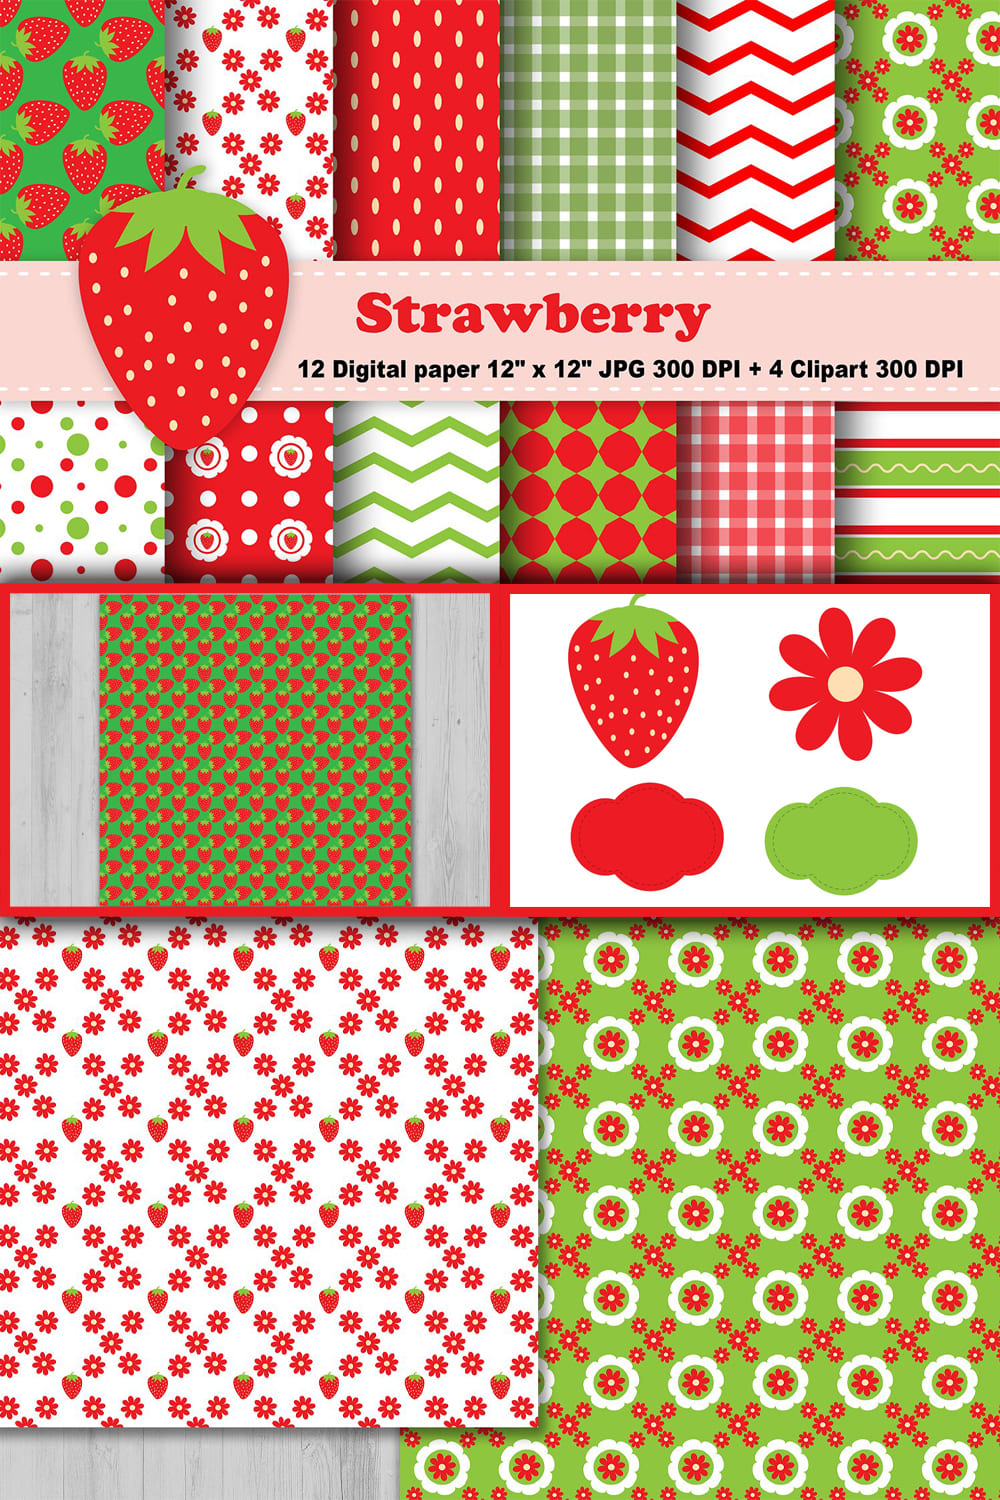 Strawberry Digital Paper, Fruits Background - pinterest image preview.